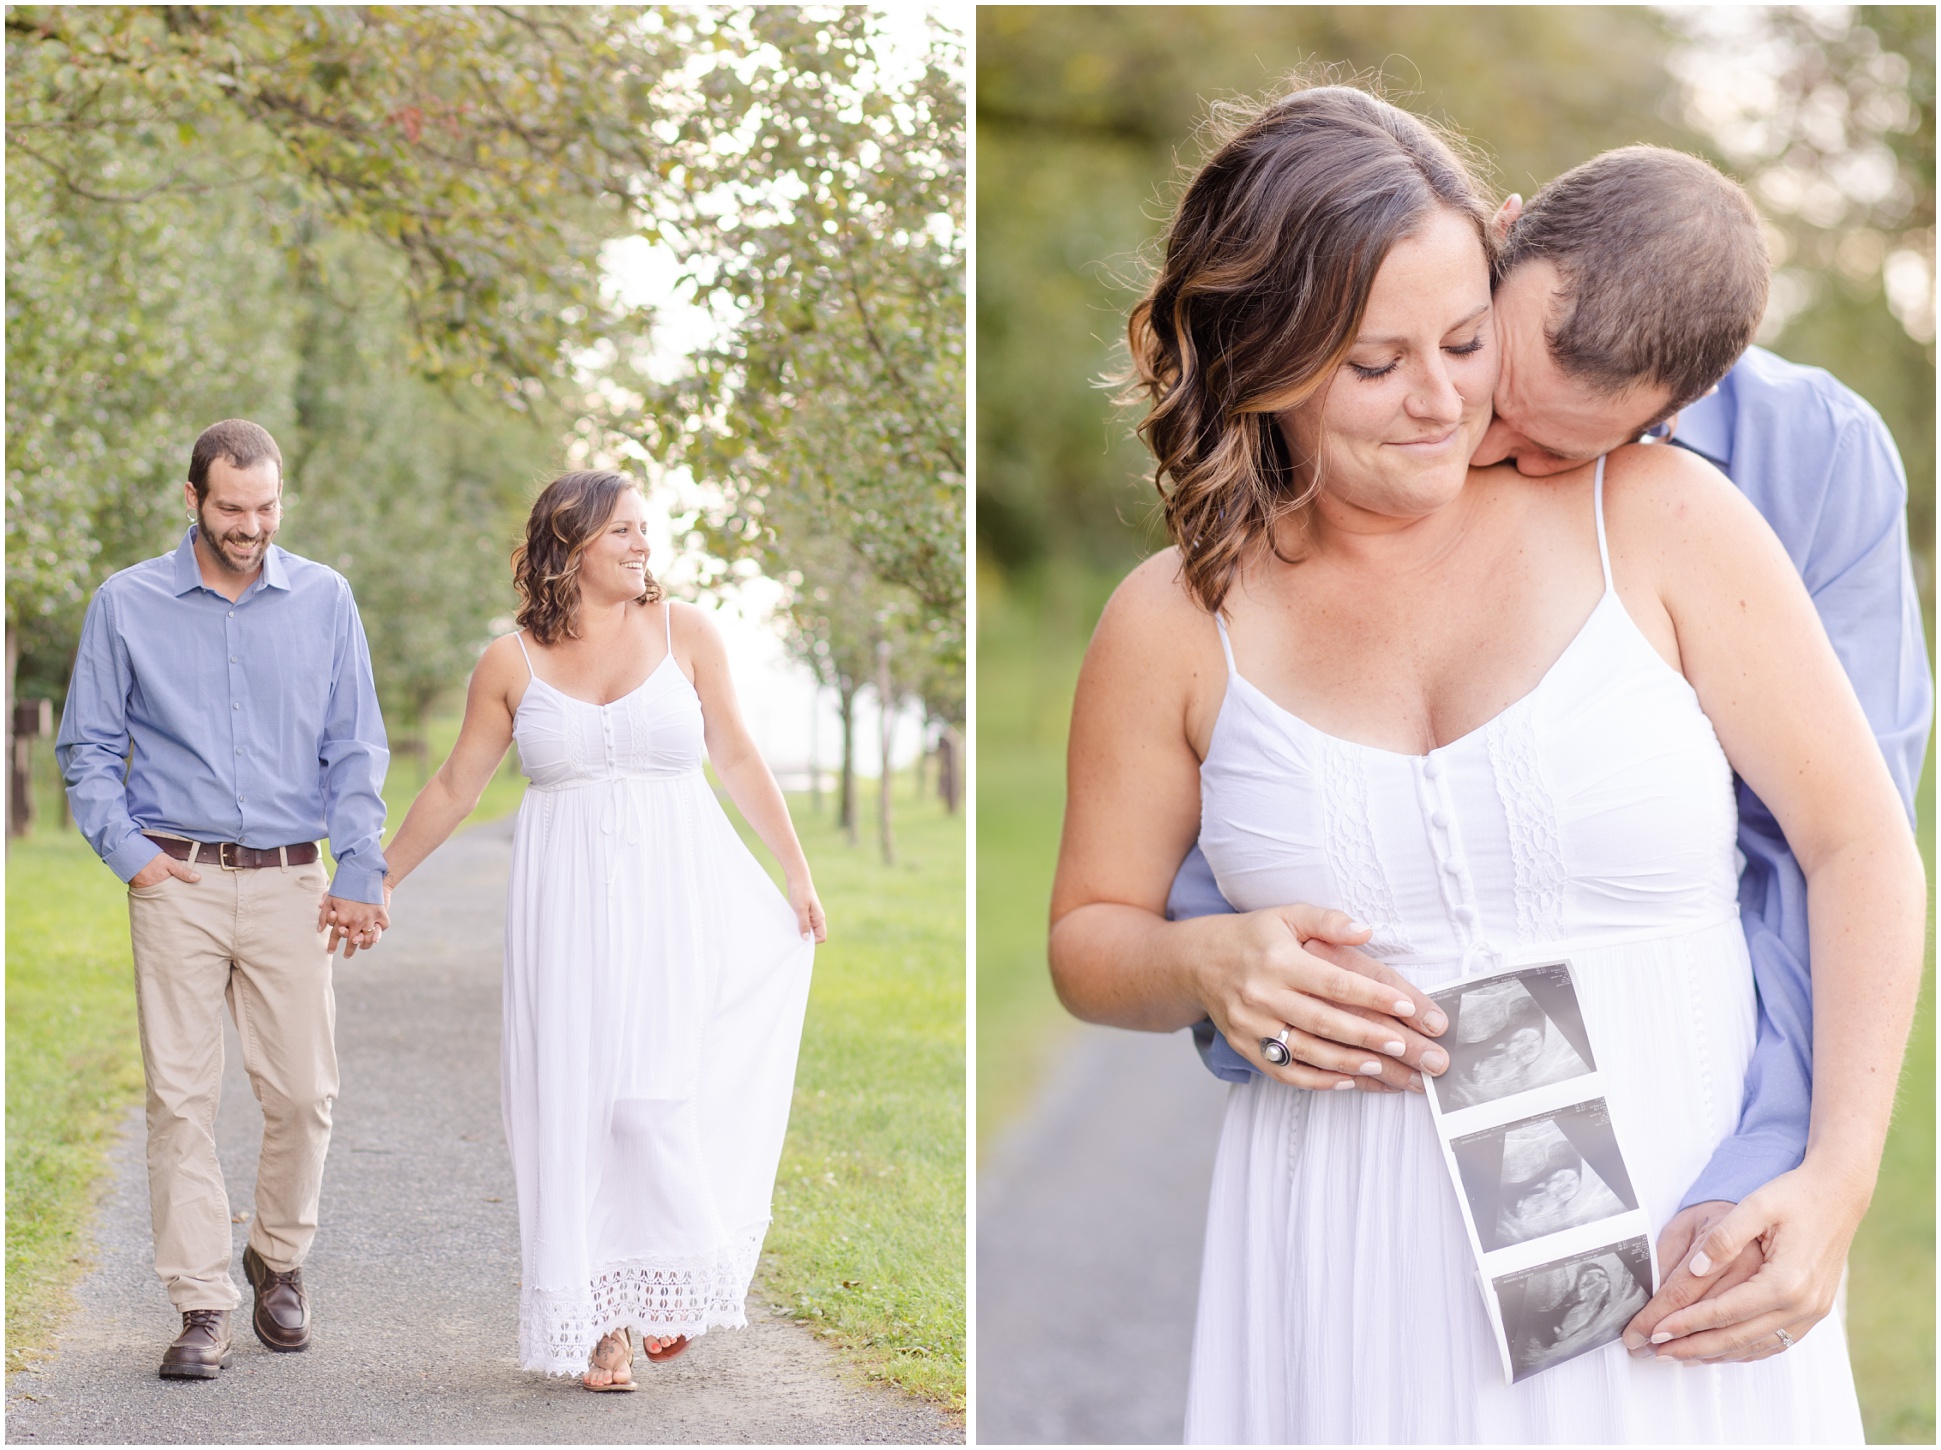 Couple strolling through park and giggling; couple holding up sonogram while husband kisses wife's neck from behind